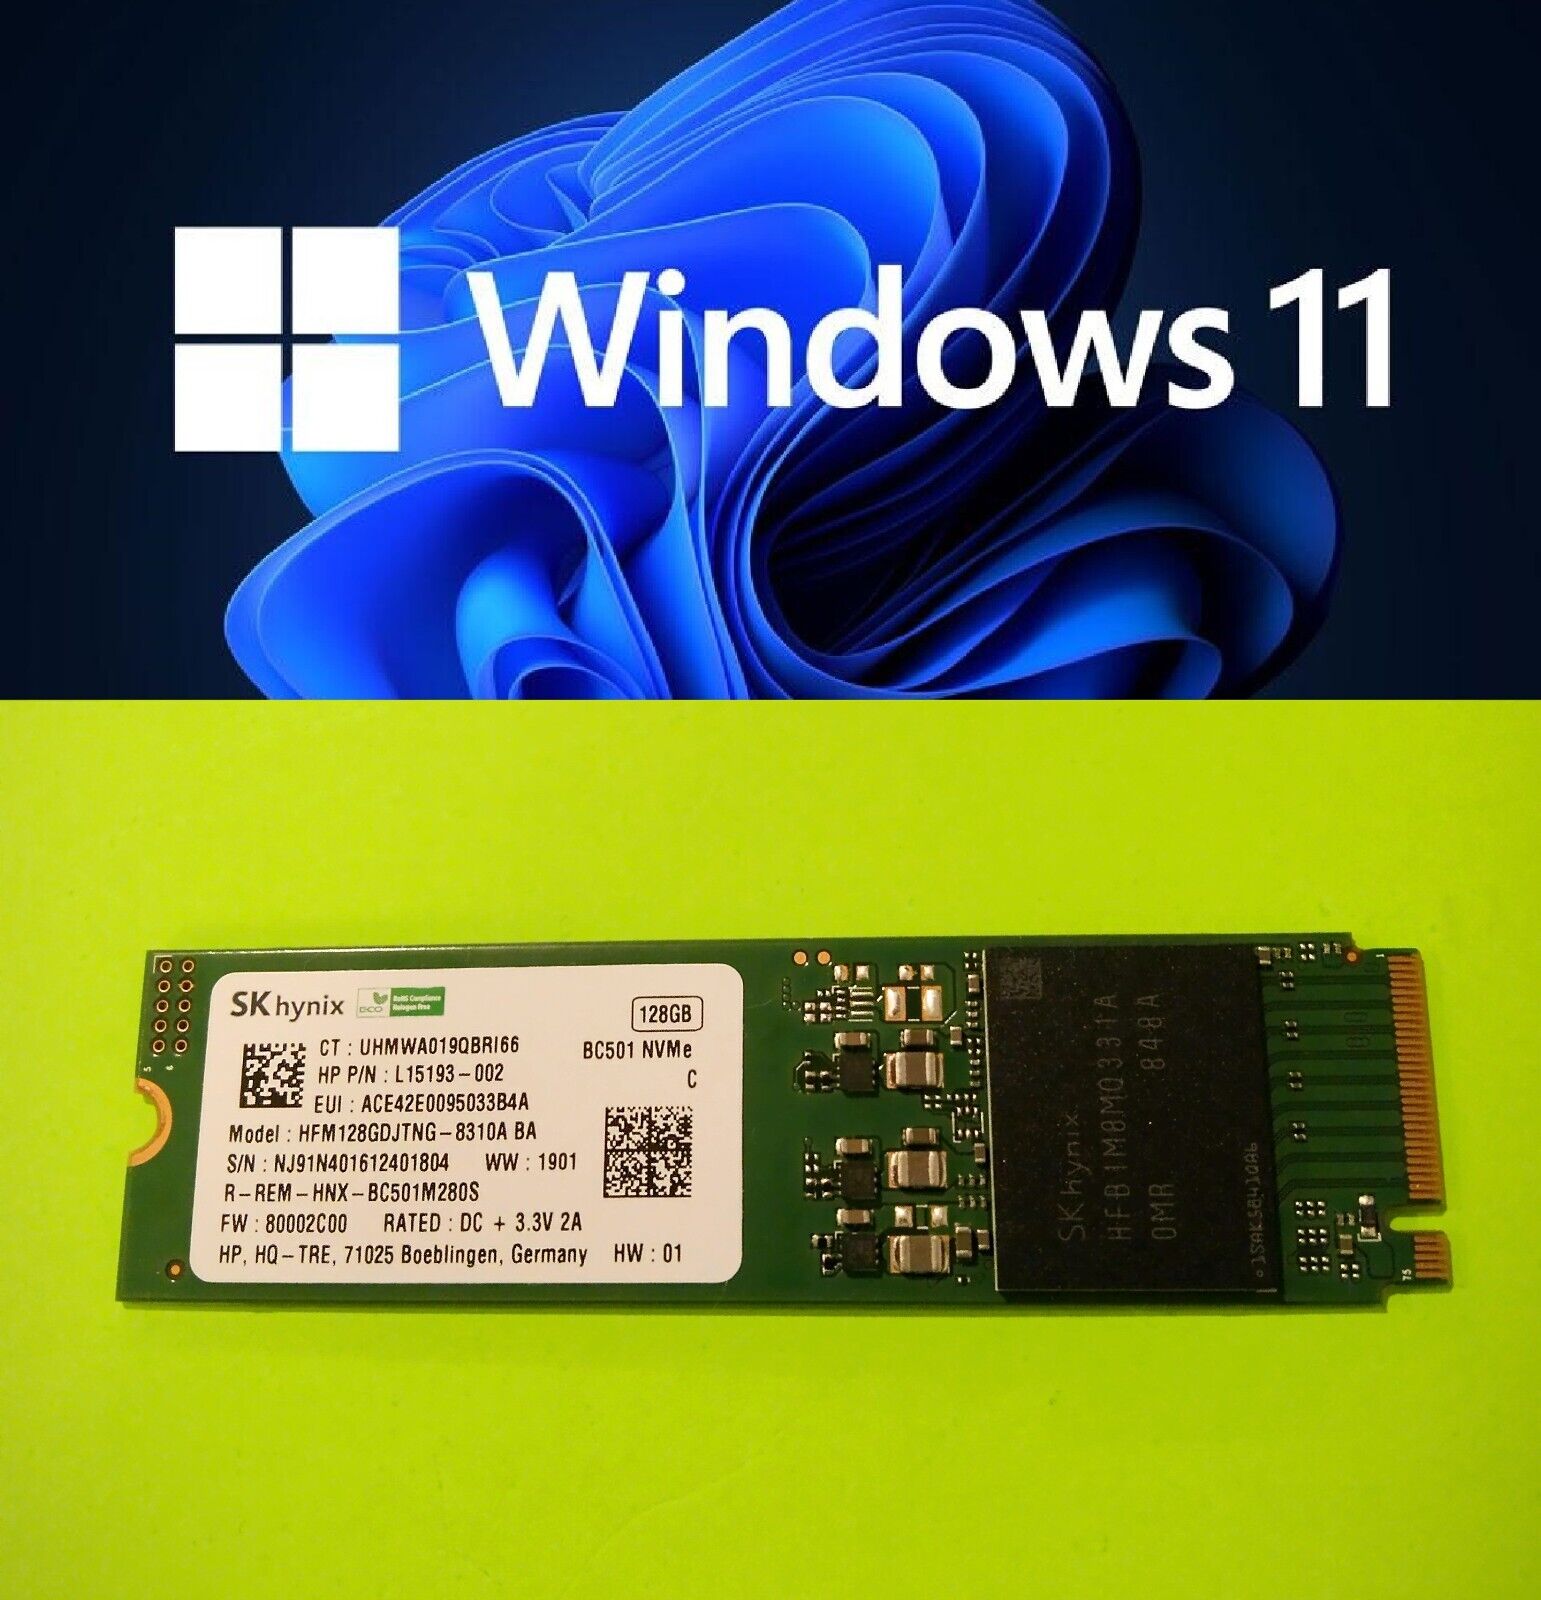 128GB PCIe M.2 2280 SSD Solid State Drive with Windows 11 Pro UEFI [ACTIVATED]